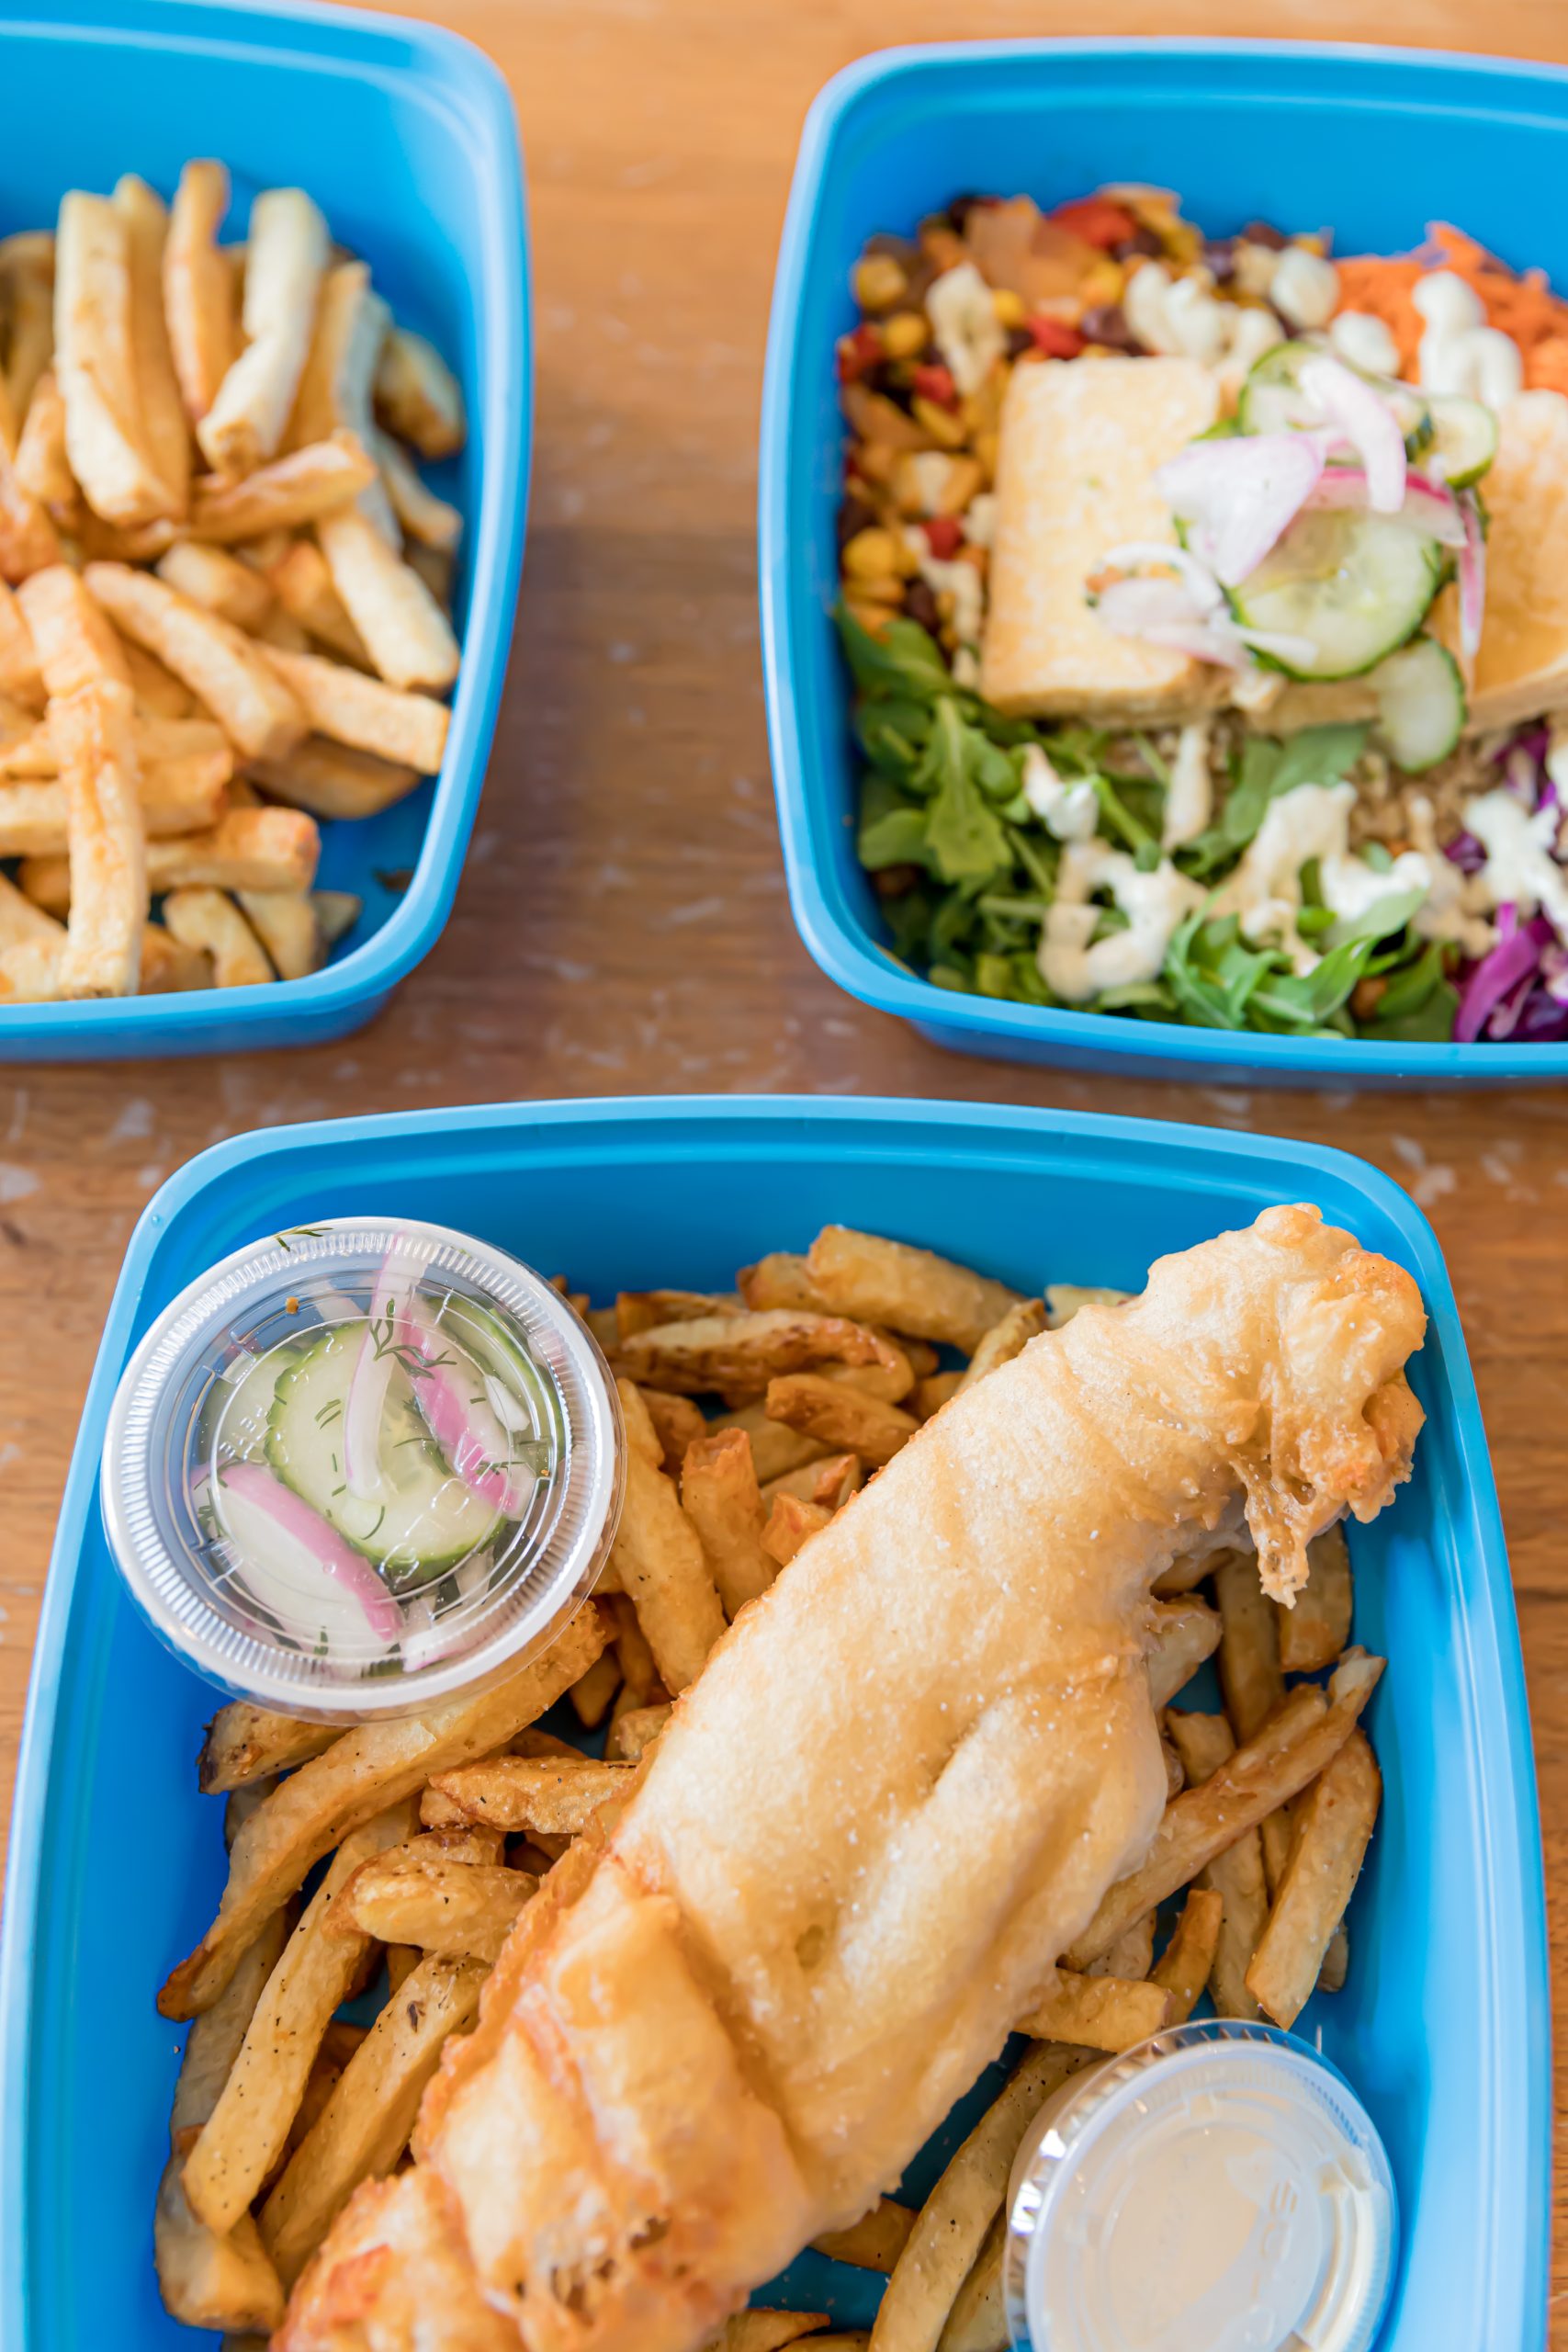 Close up photo of 3 blue takeout containers with French fries, fish and chips, and salad.